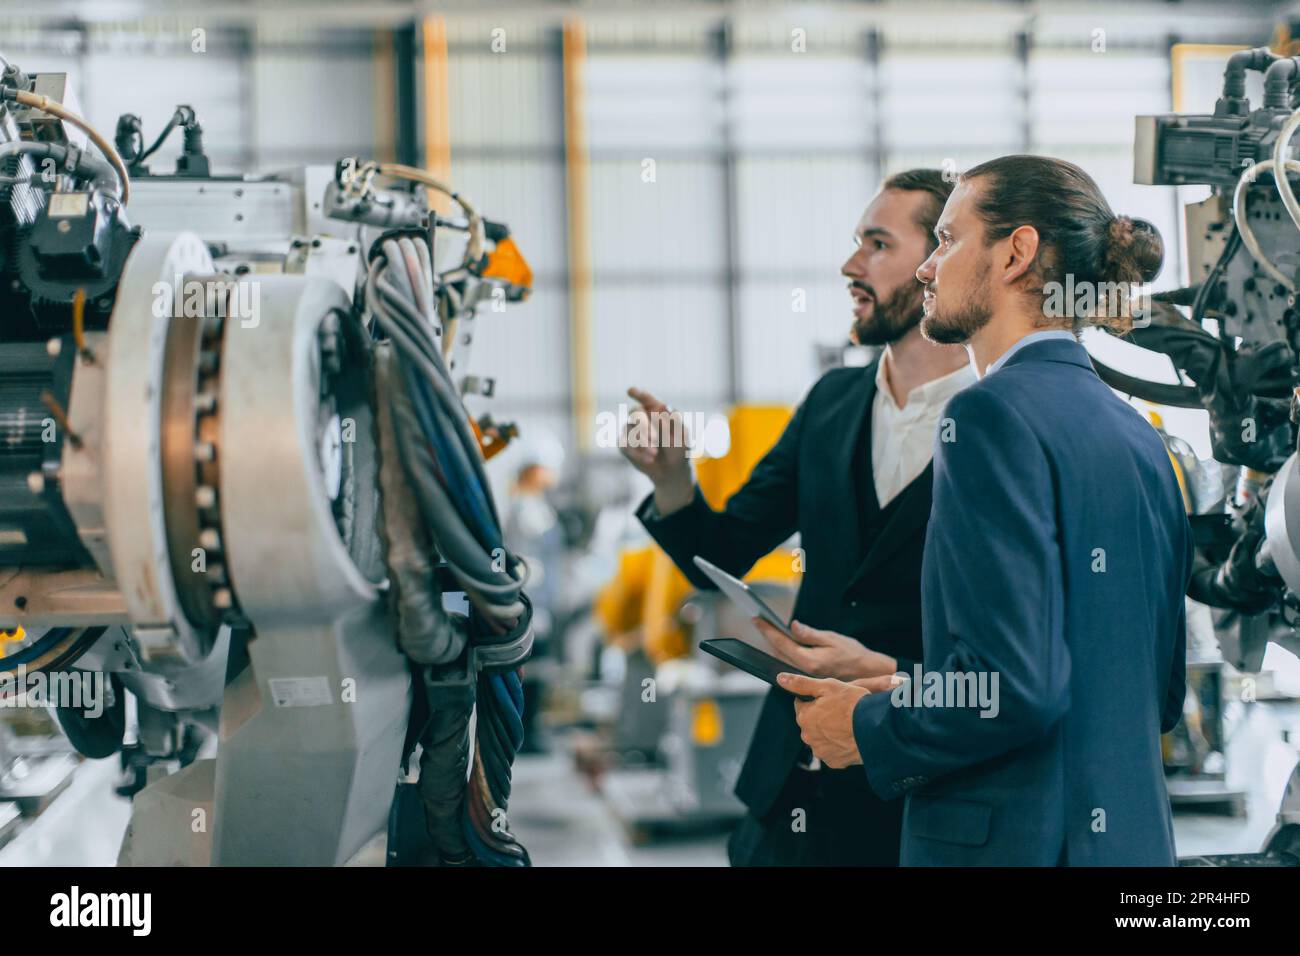 Businessman working in machinery factory robot assembly plant team working together Stock Photo